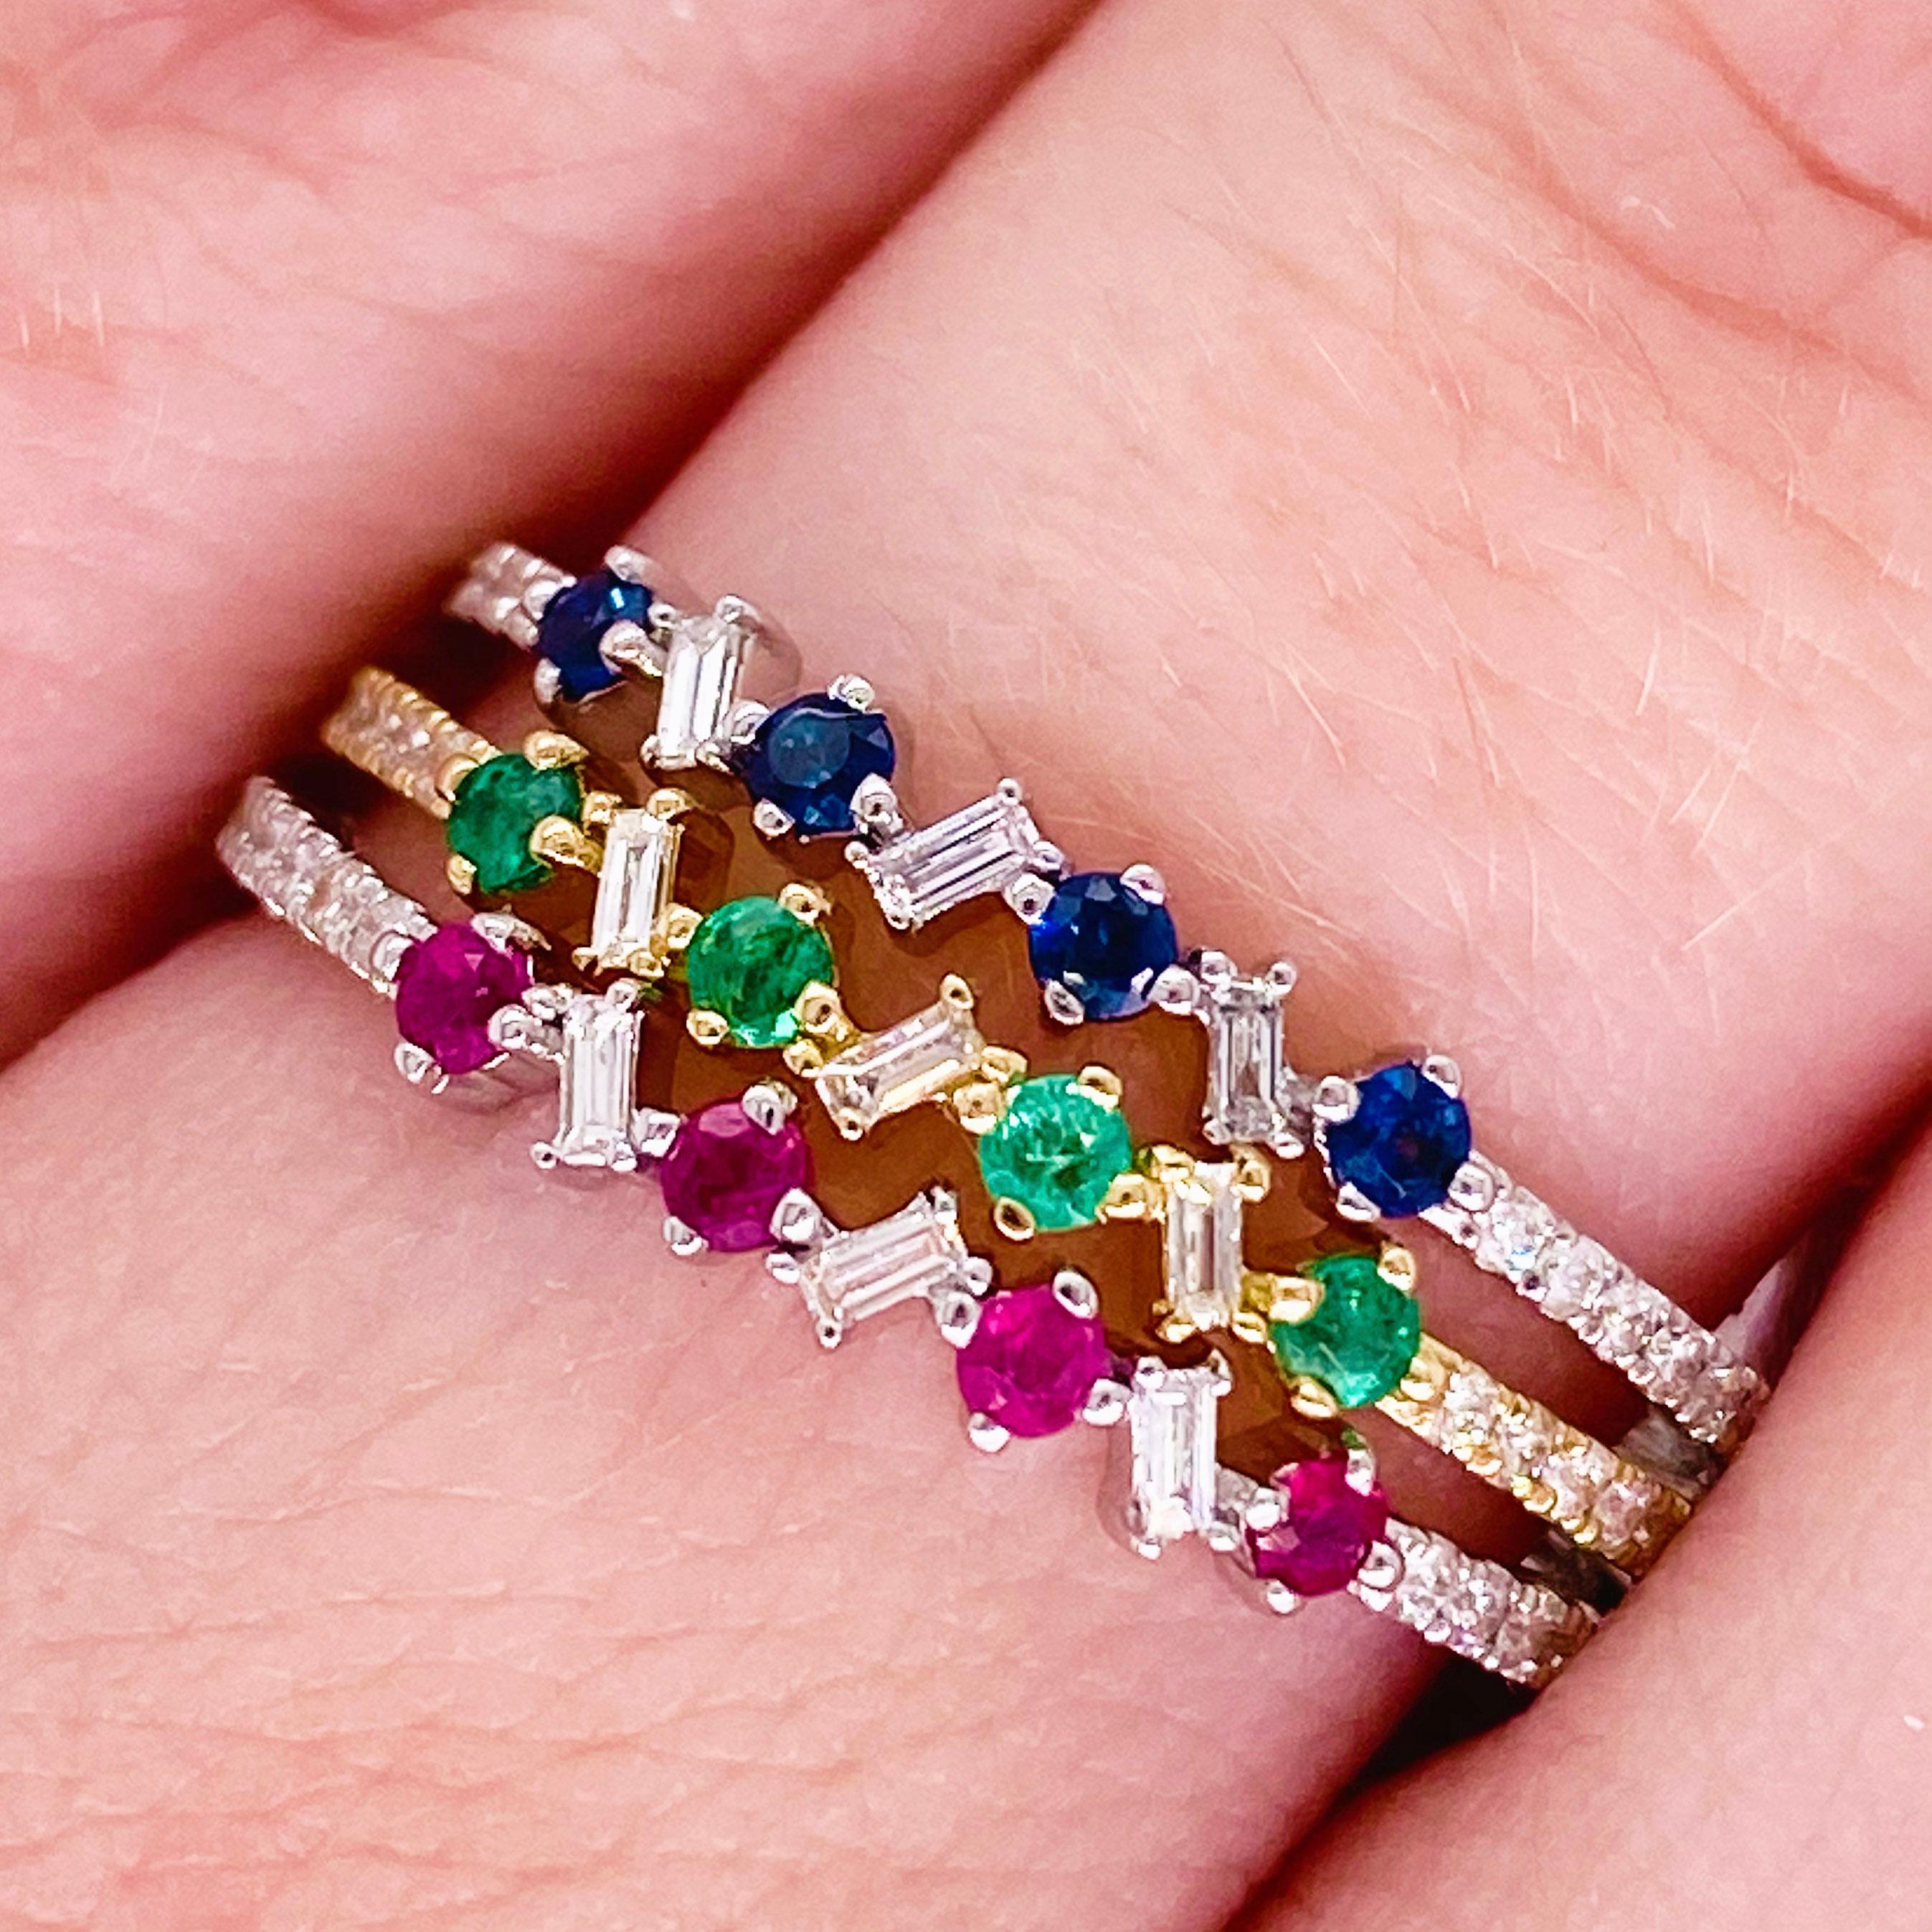 Vibrant blue sapphires and bright white diamonds have never looked better! This sapphire and diamond band has genuine, natural round sapphire gemstones set next to bright baguette and round white diamonds. The stones are set in a 14 karat white gold